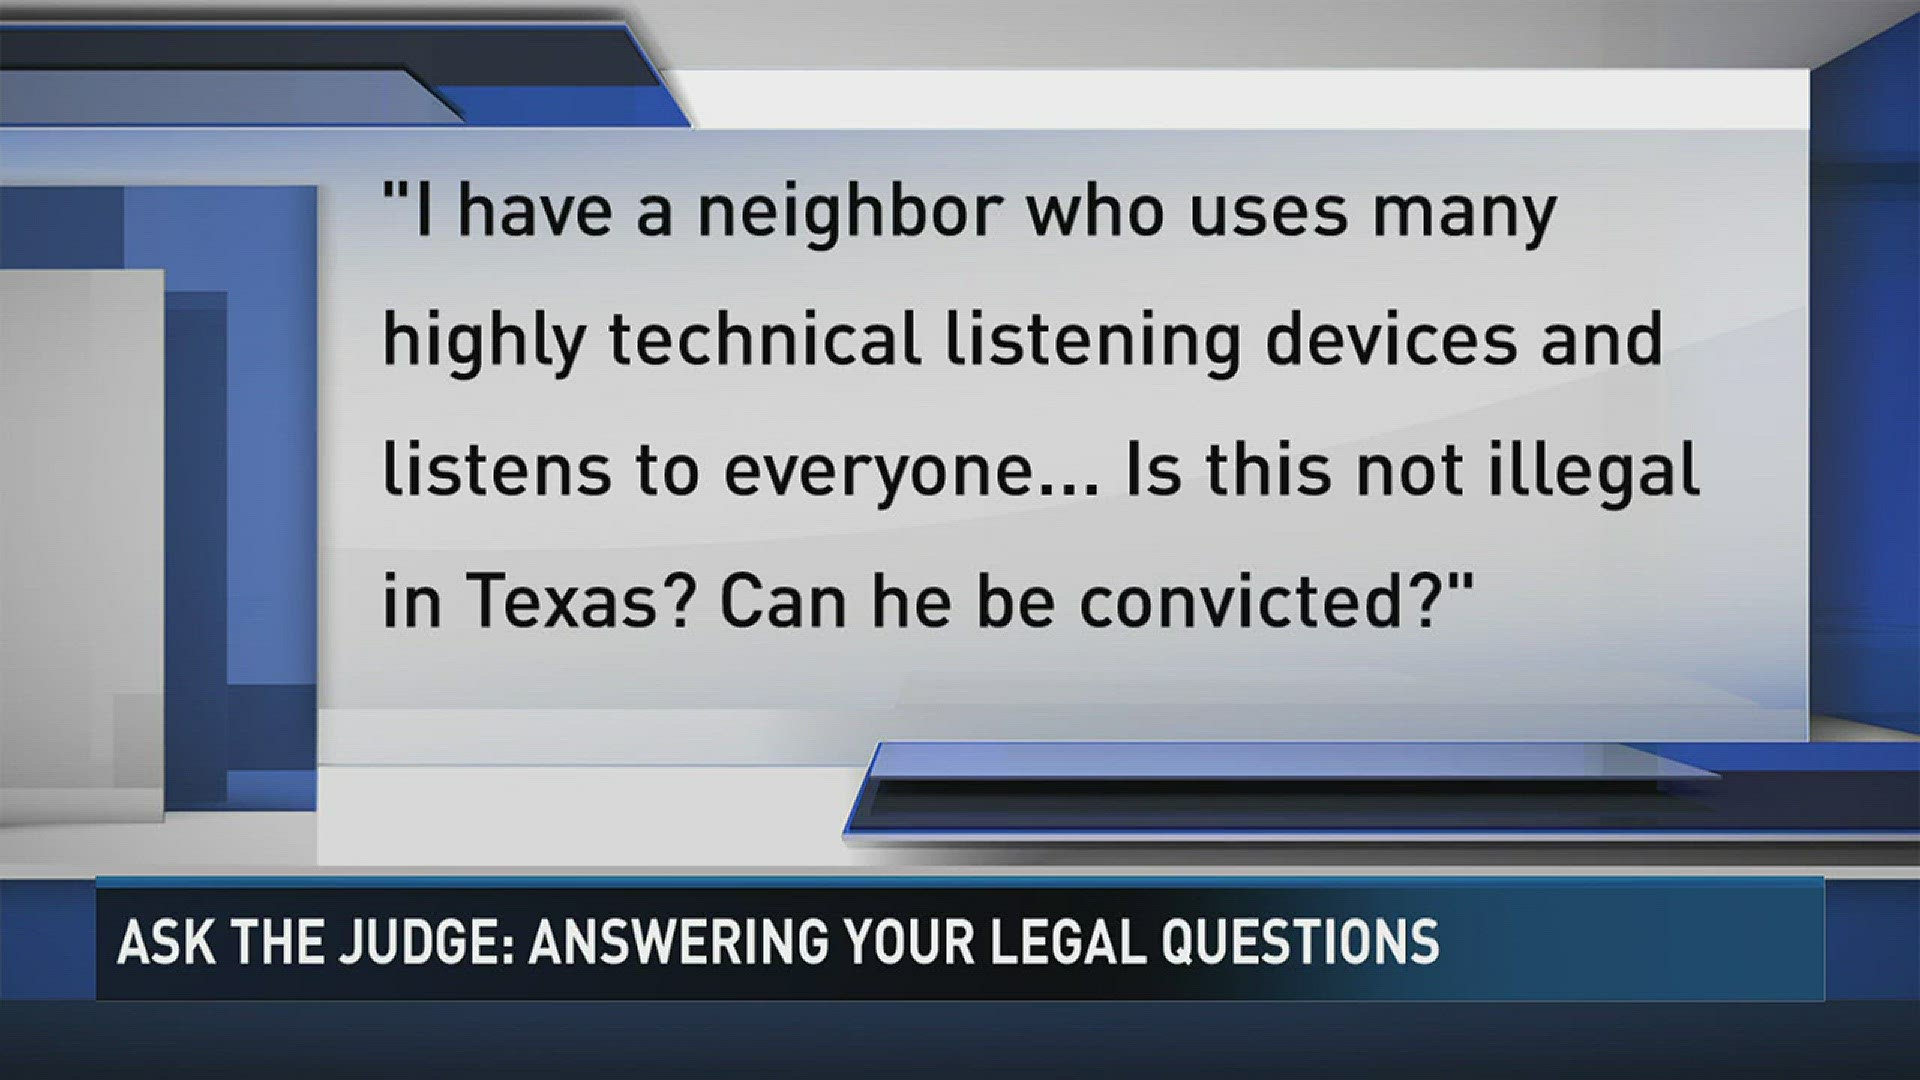 If you have any questions for Ask the Judge, you can send them to 12news@12newsnow.com.